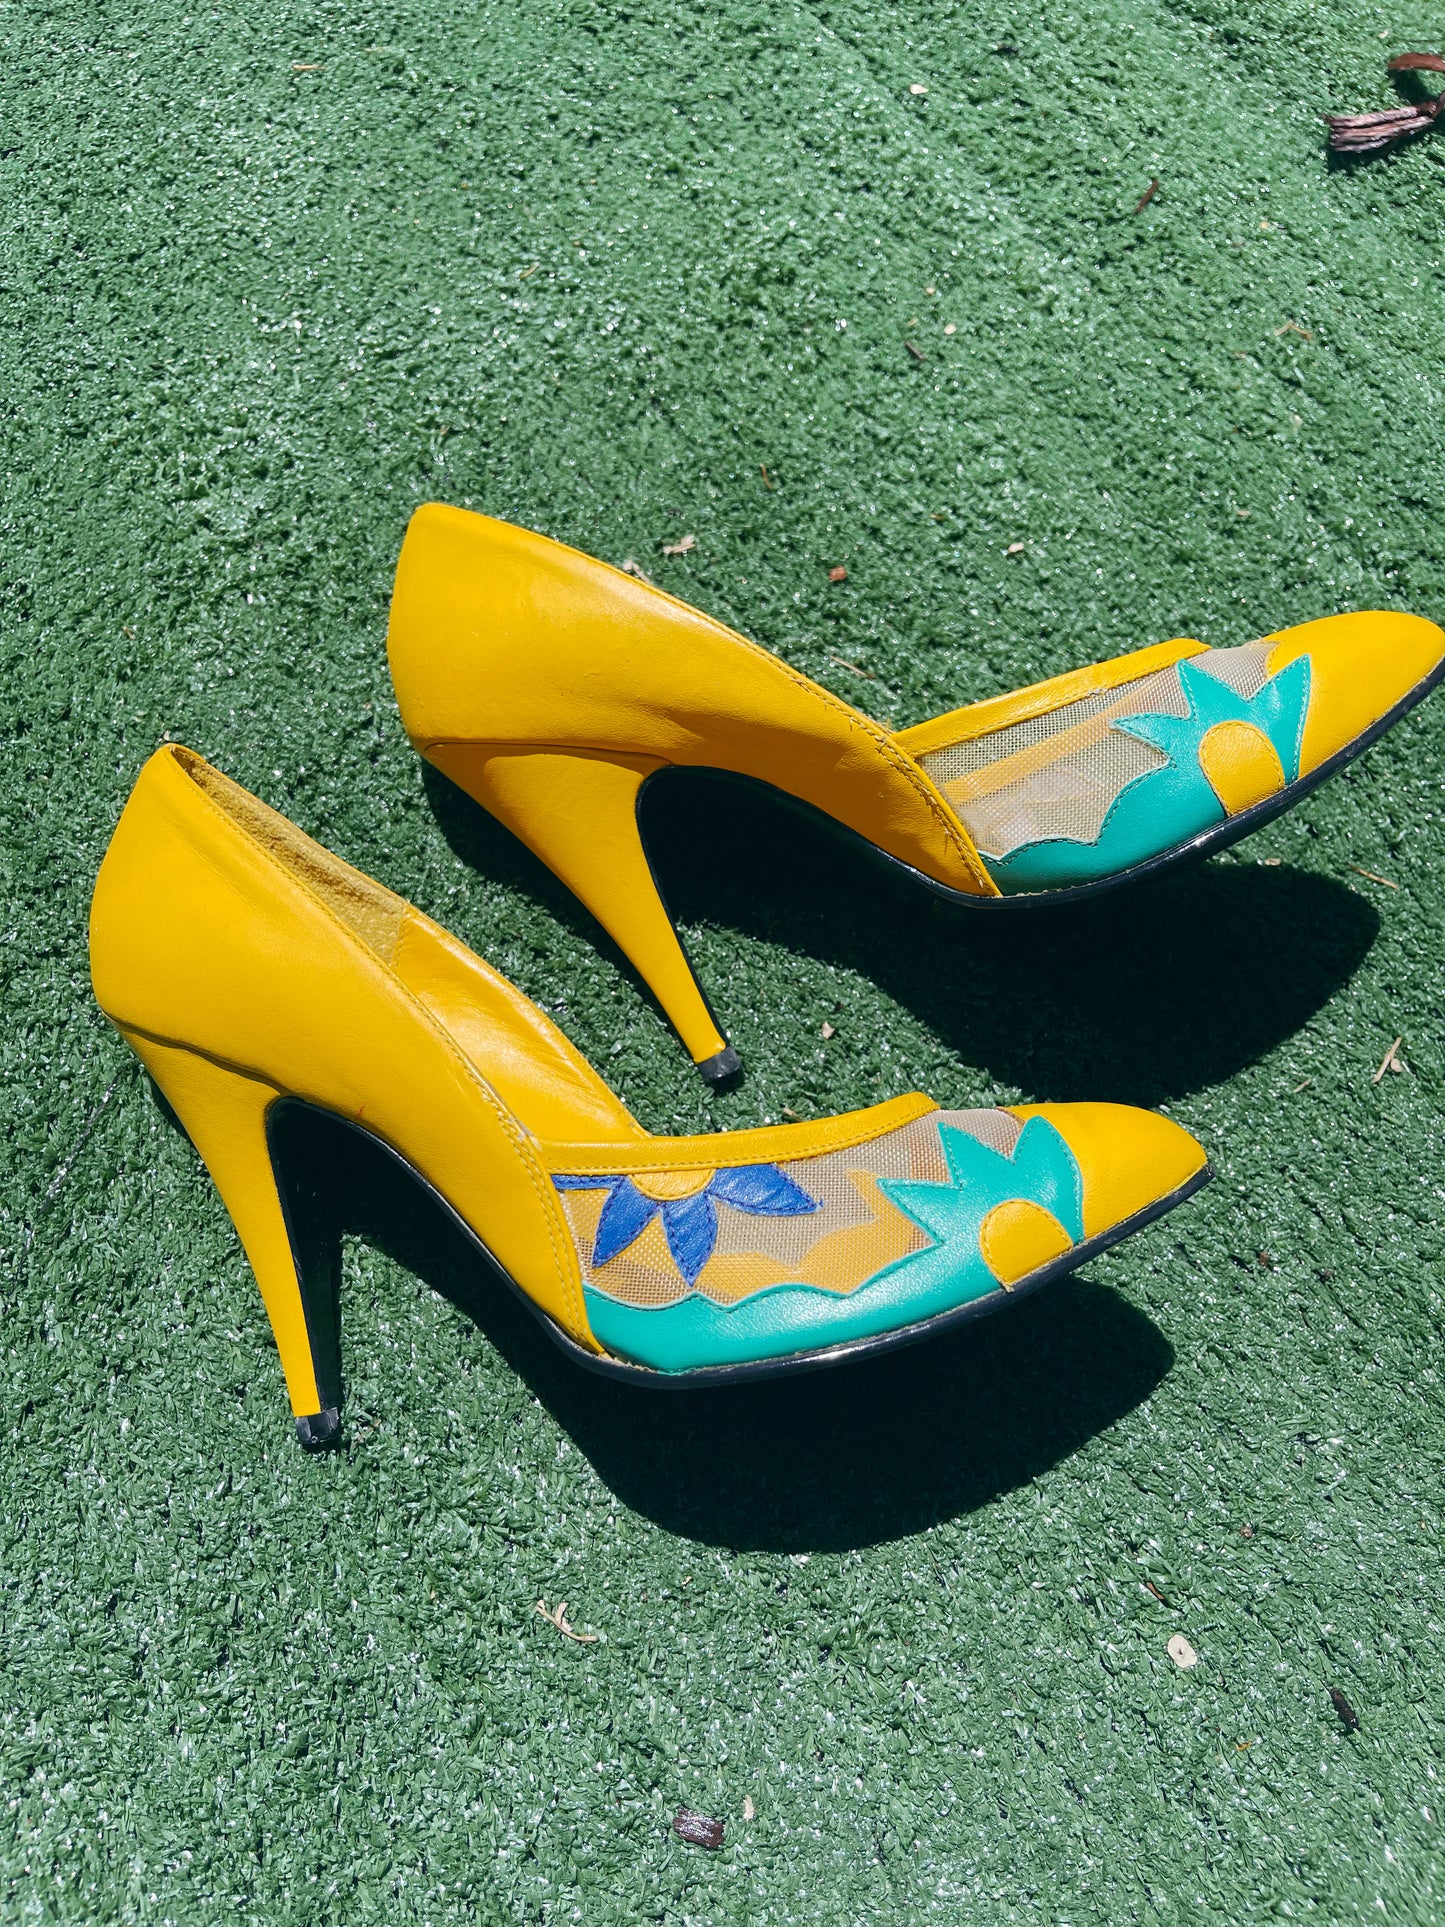 Vintage 70s / 80s "Enchanted" Made in Brazil Mustard Yellow Mesh Toe Flower Design Leather 4” heels size 8 *Original Shoe Box Not Included*